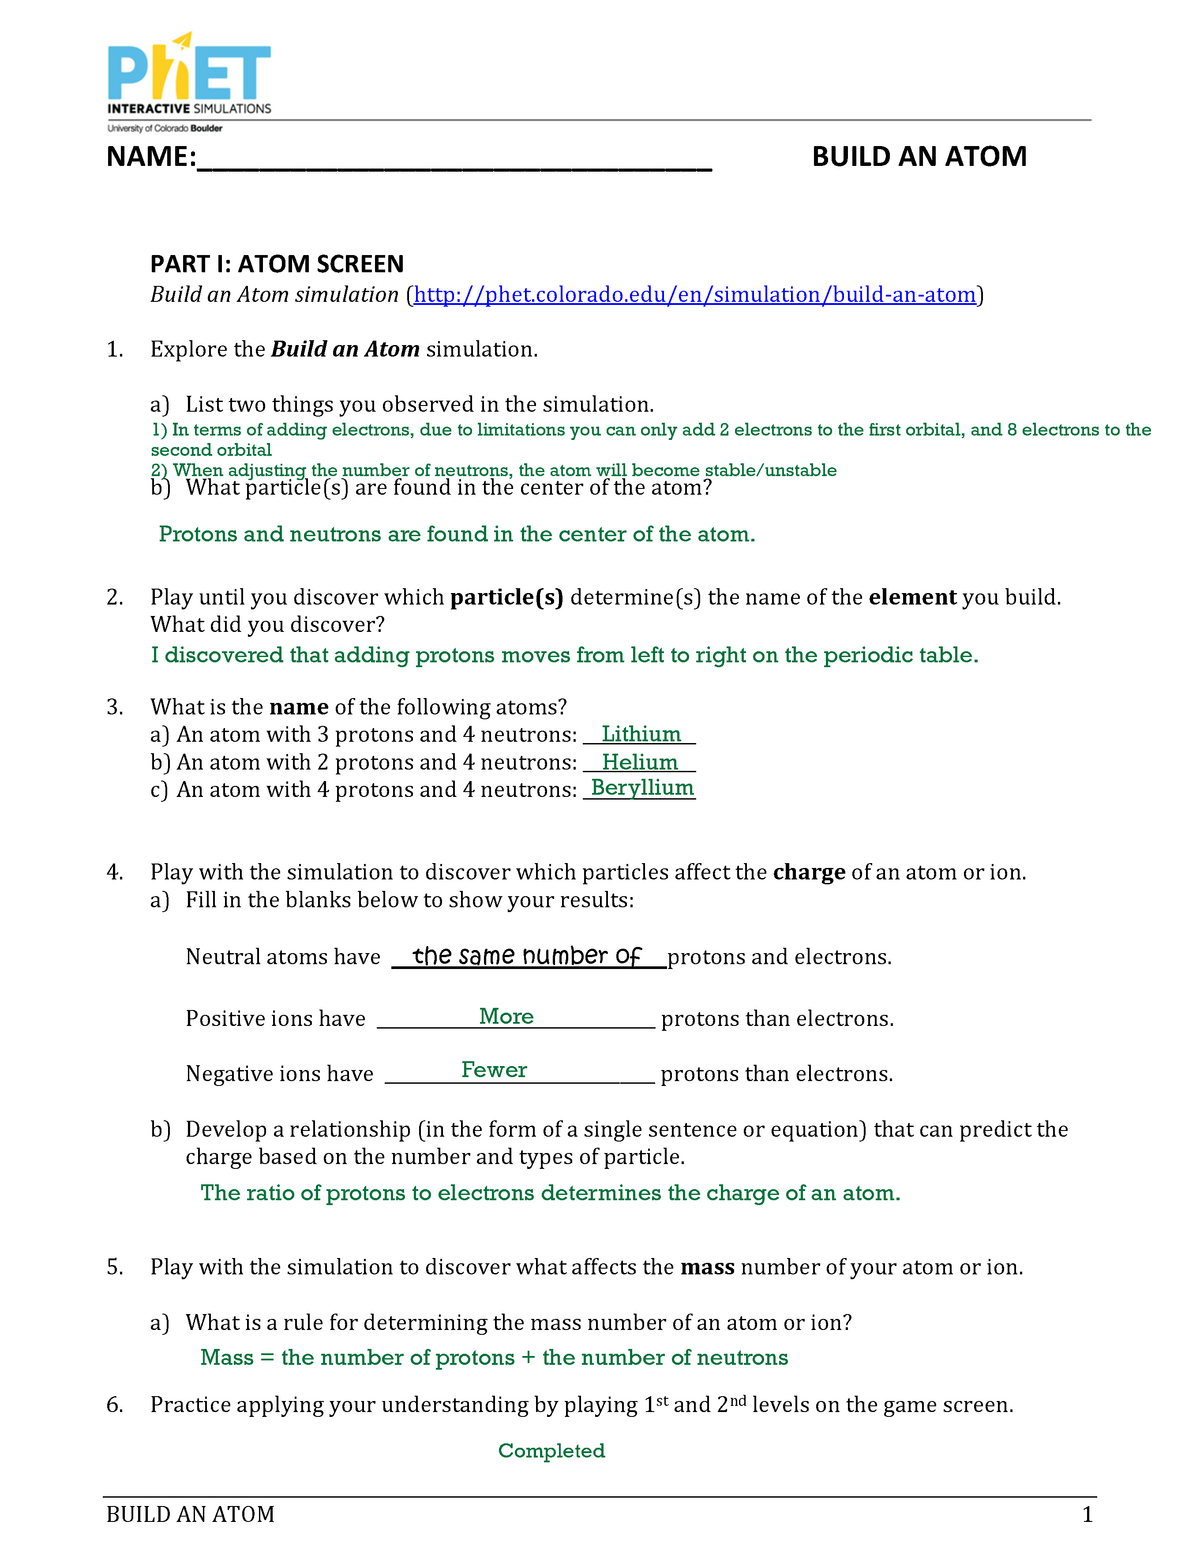 build-an-atom-worksheet-answers